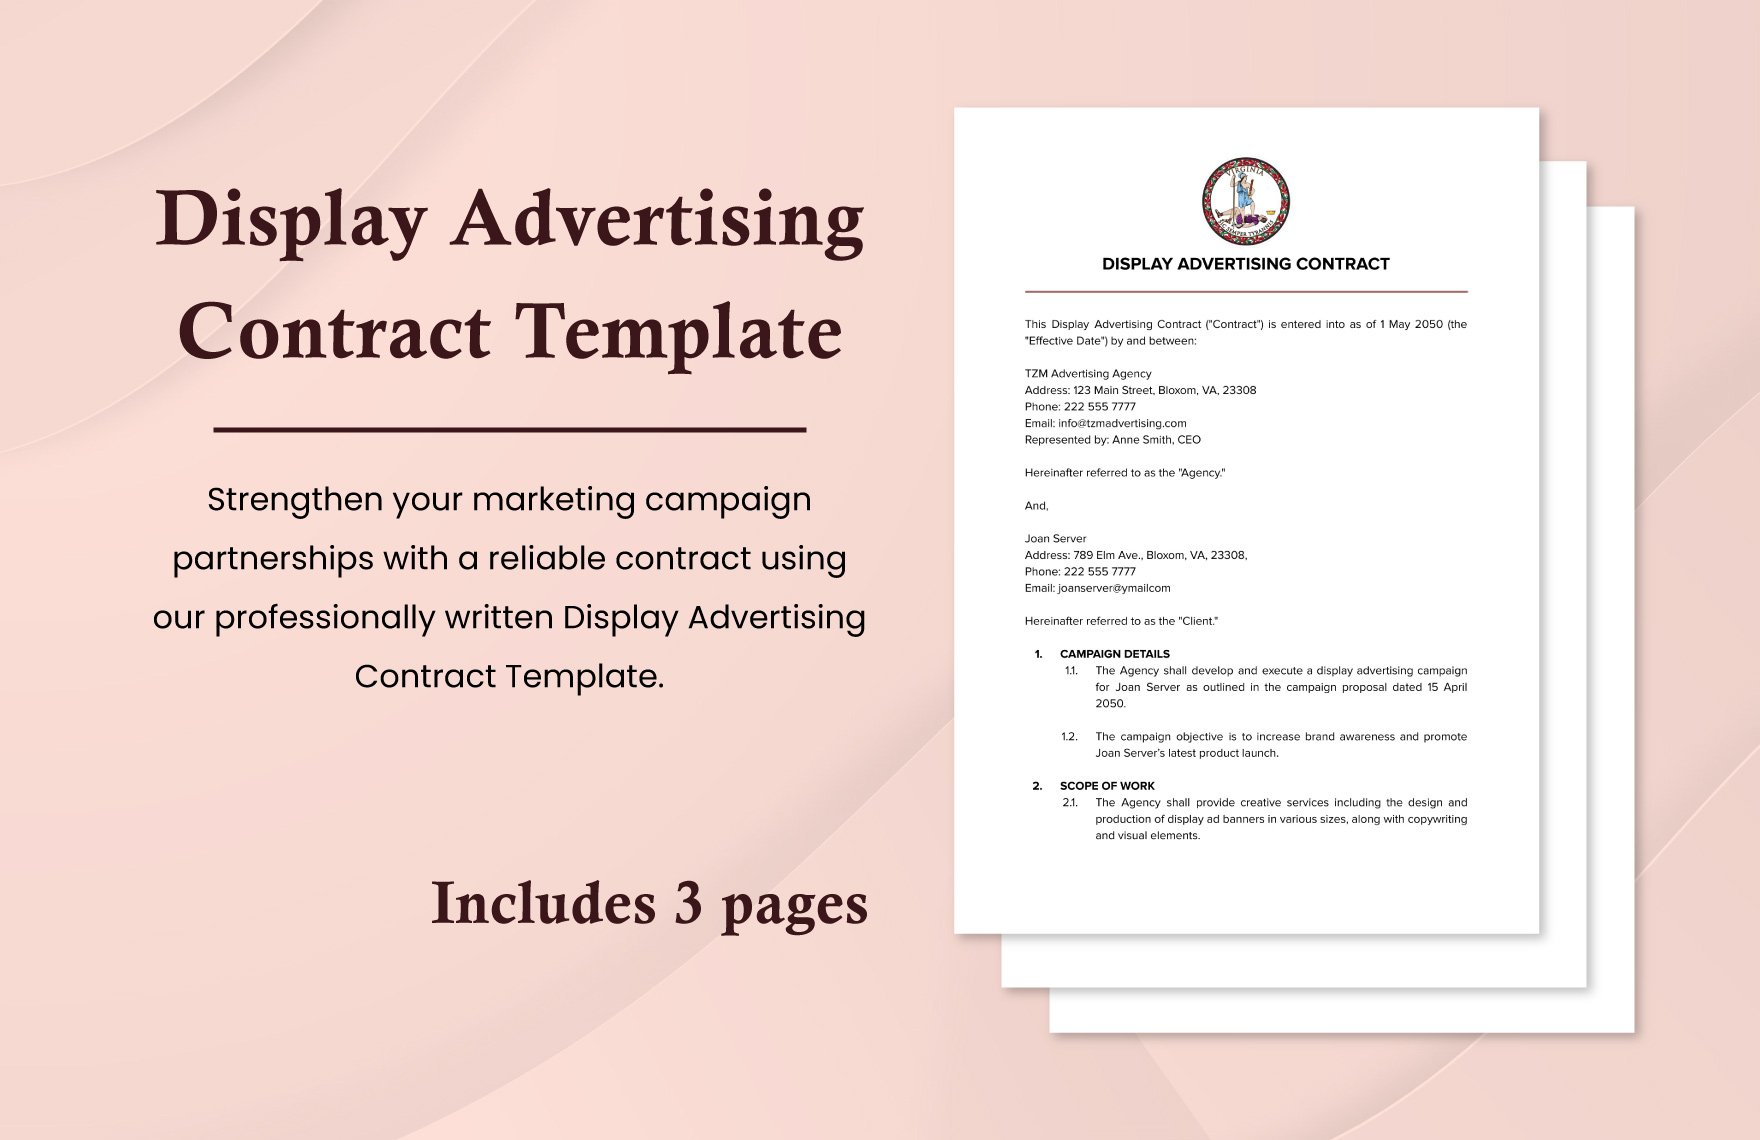 Display Advertising Contract Template